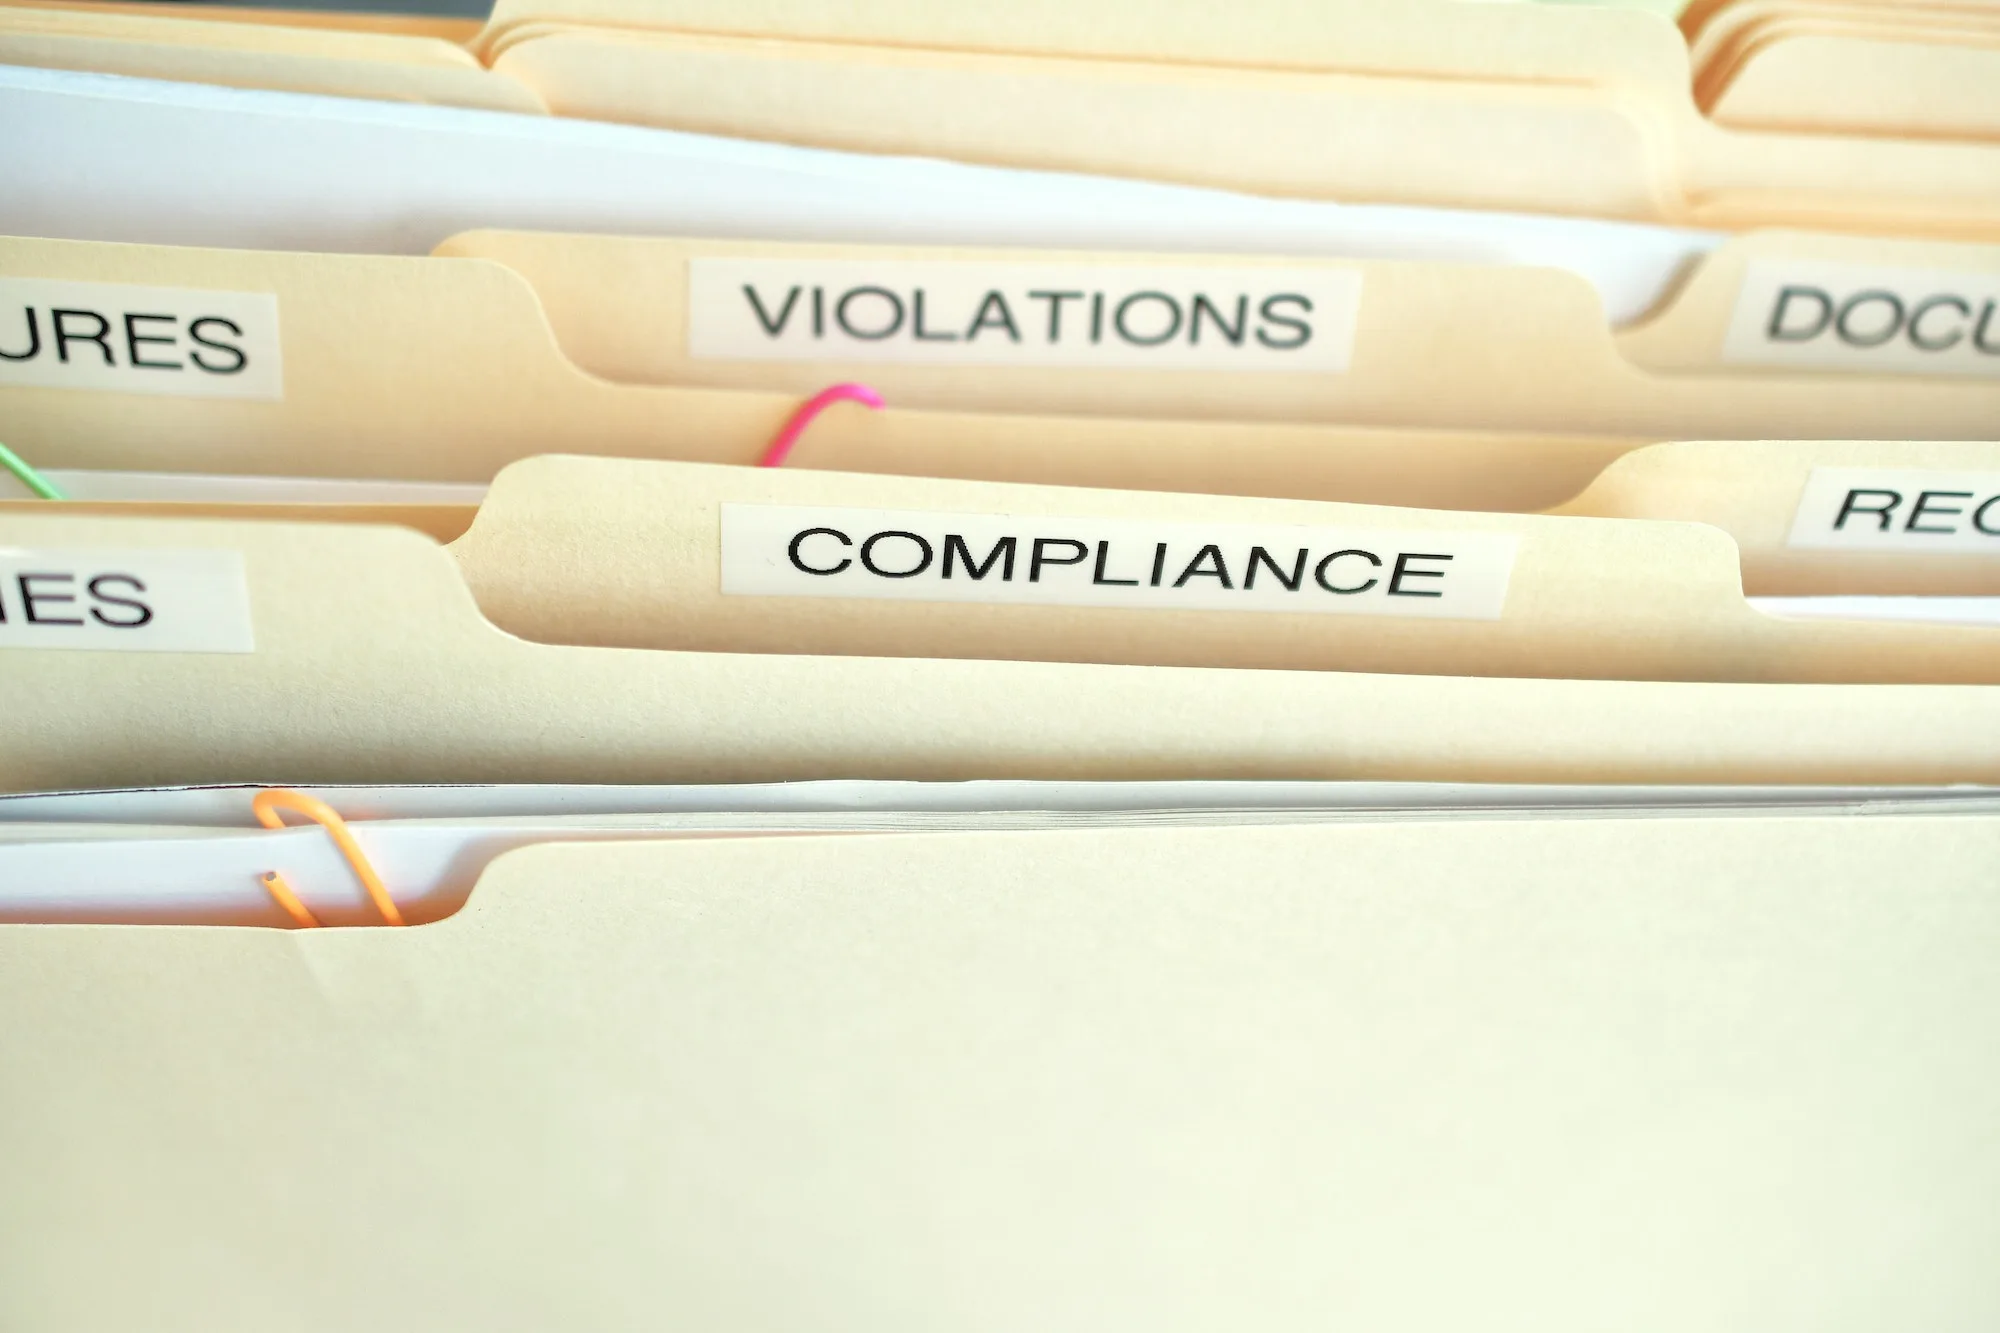 Compliance in the workplace. Folders labeled Compliance, Violations in focus.